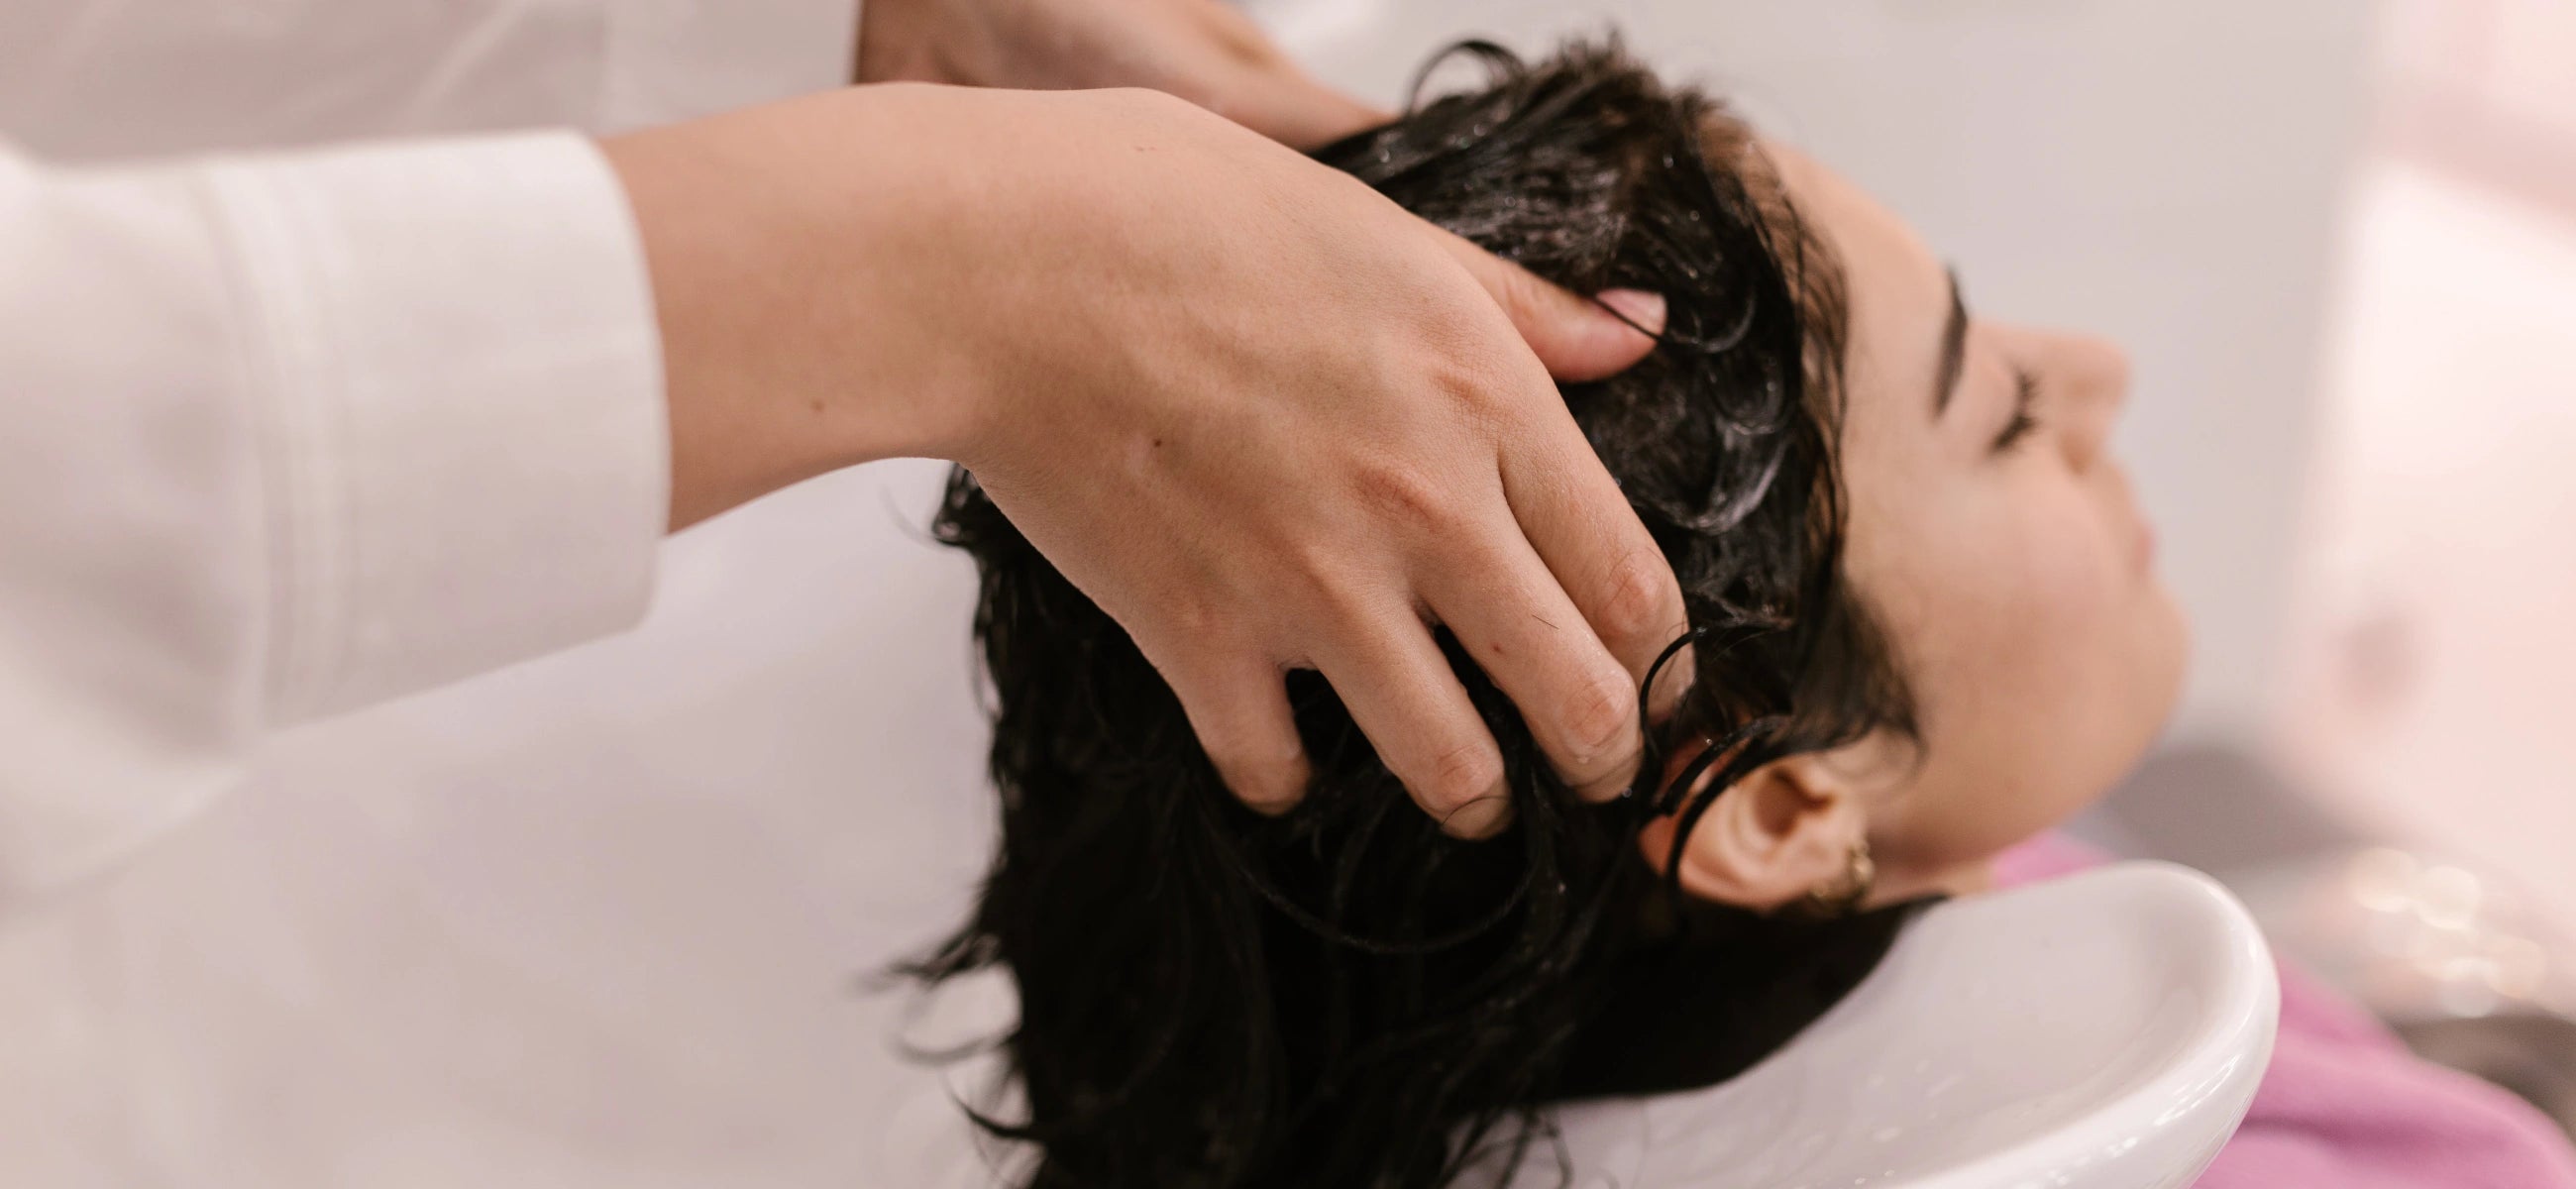 Your comprehensive overview on how to properly wash your hair